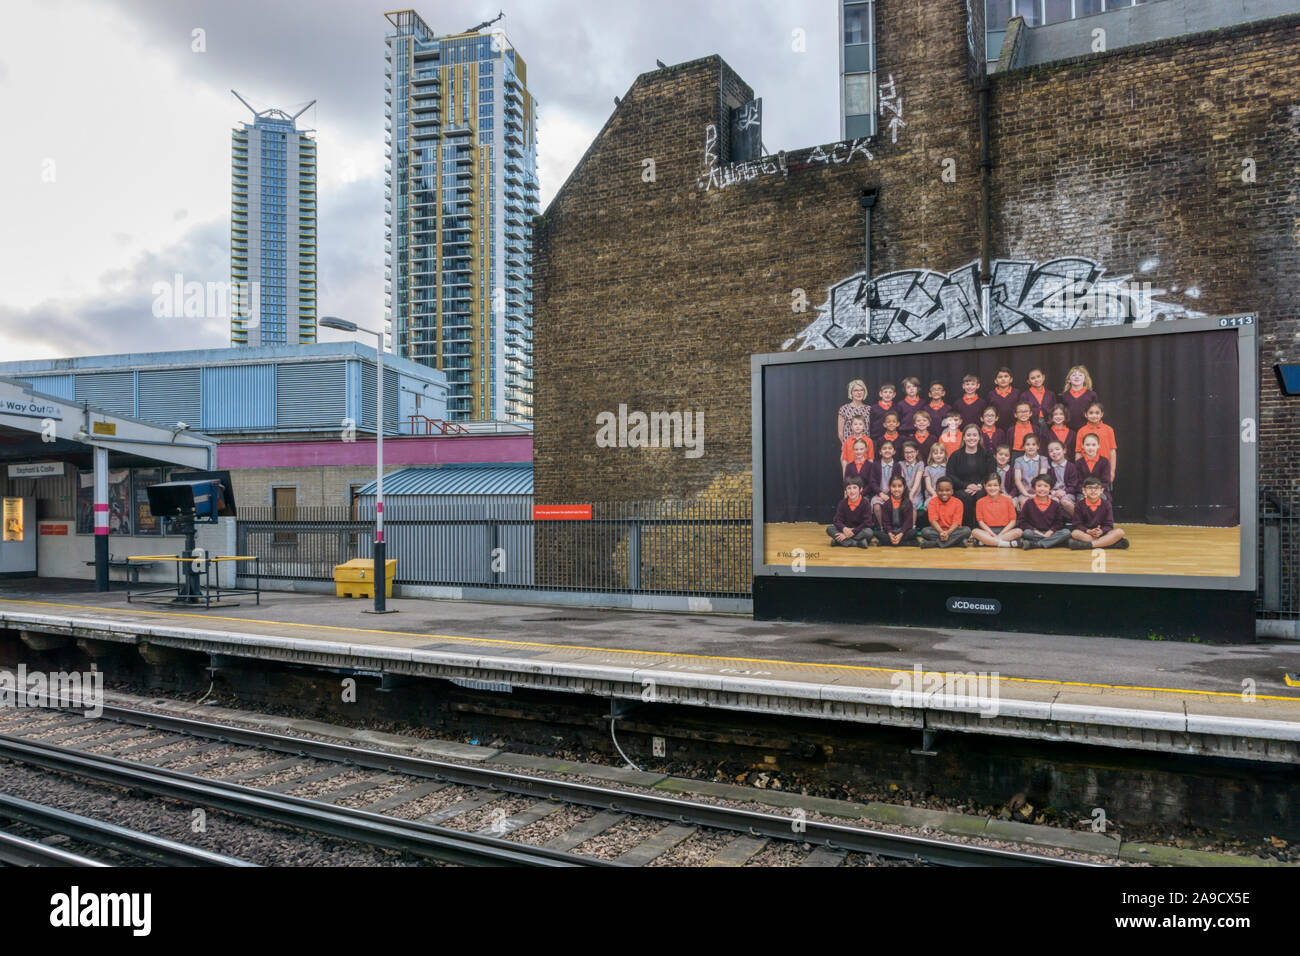 Elephant & Castle station with one of the billboards showing the Year 3 Project by Steve McQueen. Stock Photo